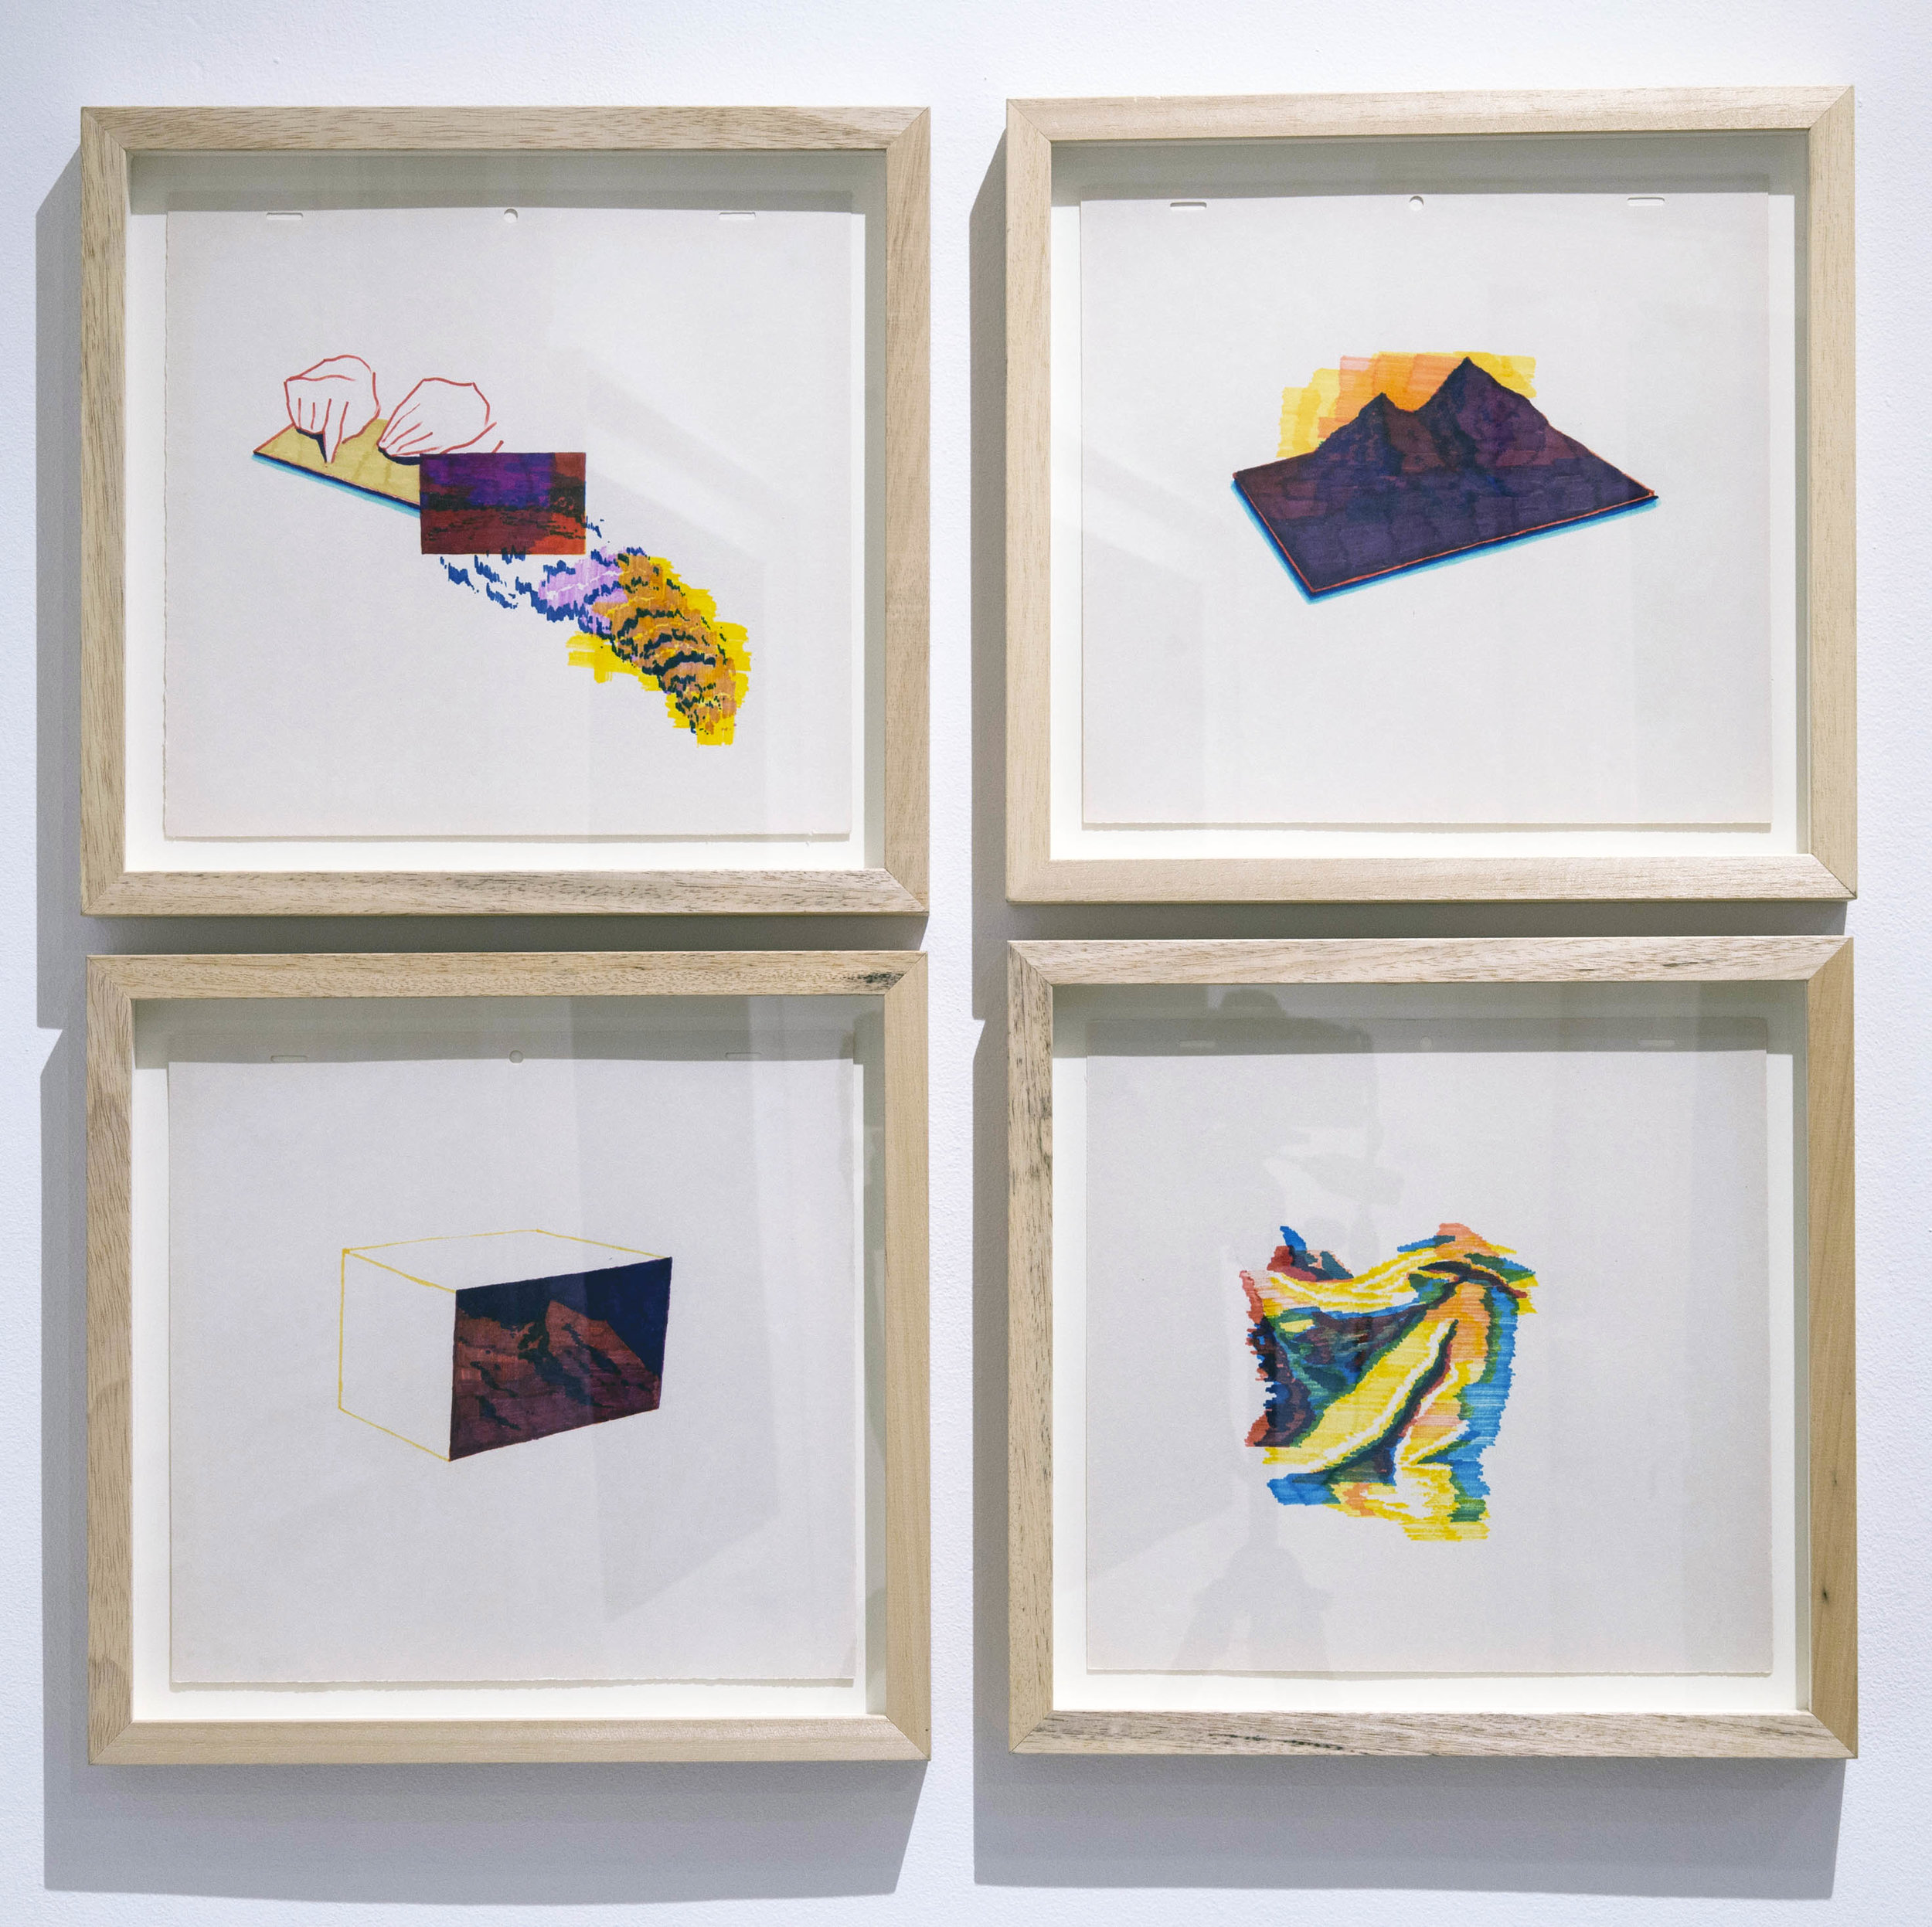 SUBJECTIVE CARTOGRAPHY (2014) series of 4 drawings felt pen on paper, 28.6x30.2cm/each